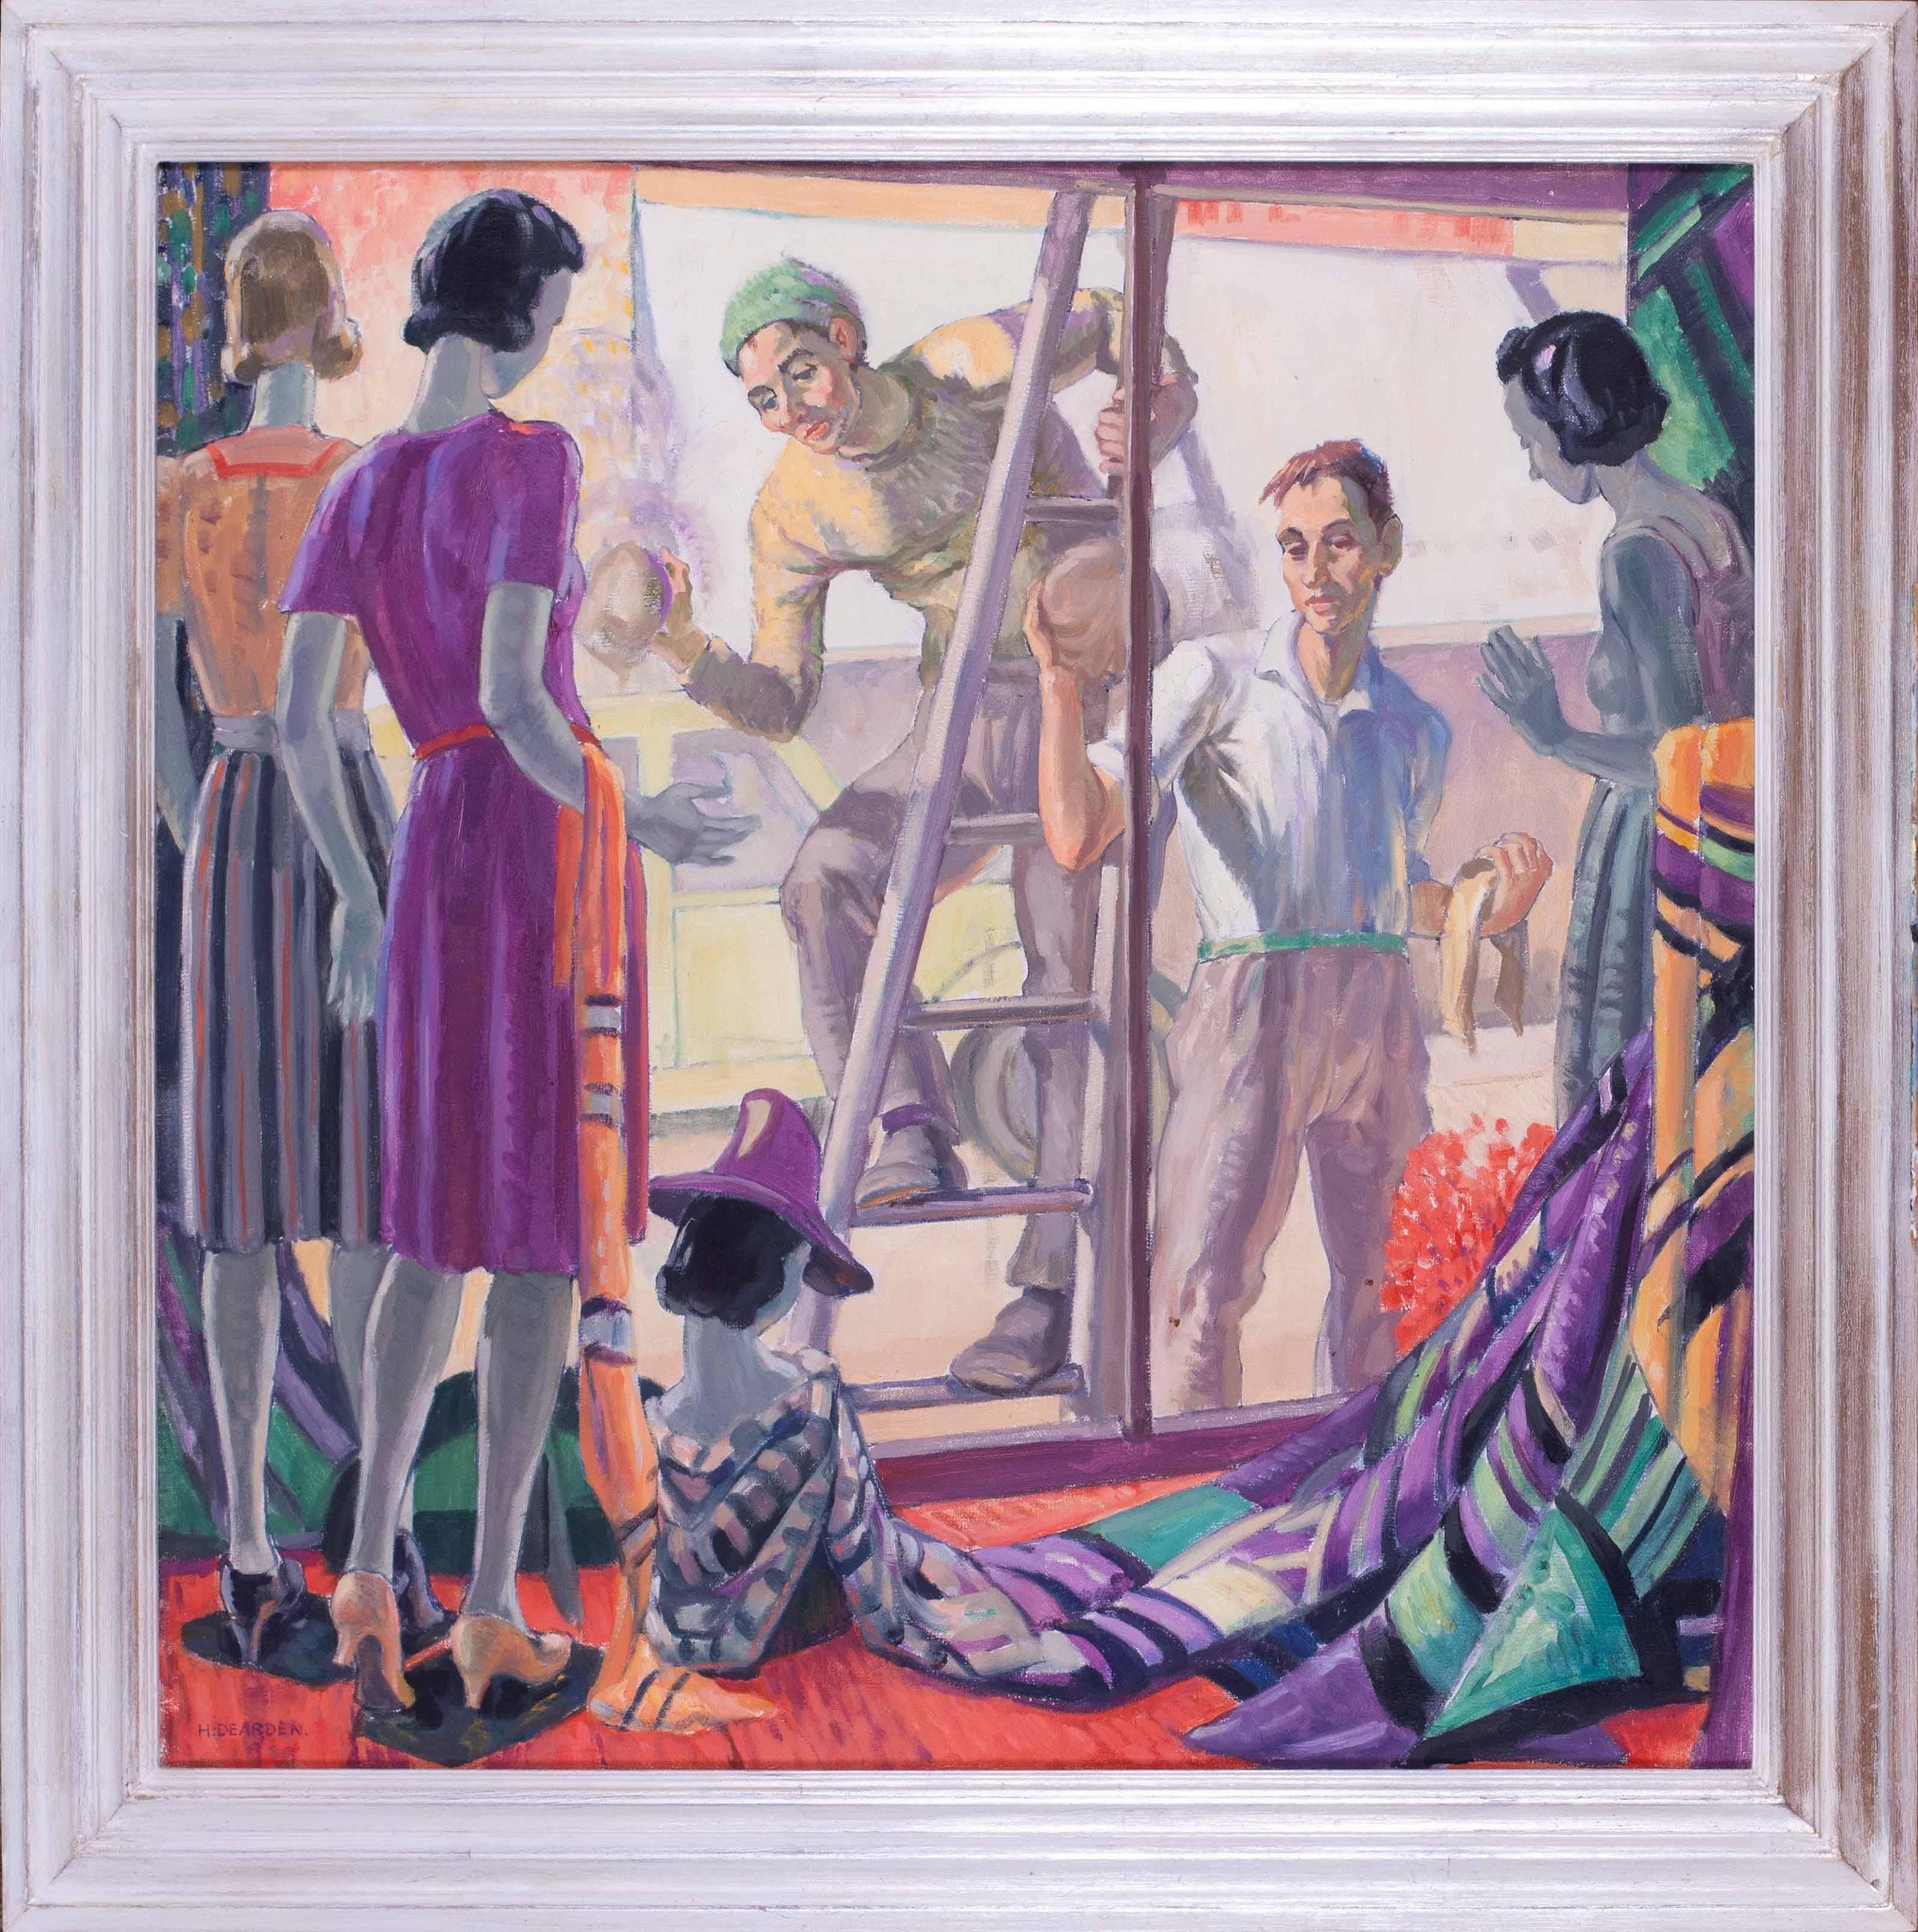 HAROLD DEARDEN (BRITISH, 1888-1962)
THE WINDOW CLEANERS
Oil on canvas
Signed `H DEARDEN’ (lower left)
30 x 30 in. (76.3 x 76.3 cm.)

Dearden studied at Rochdale School of Art under H Barrett Carpenter, 1905–10, then at the Royal College of Art for